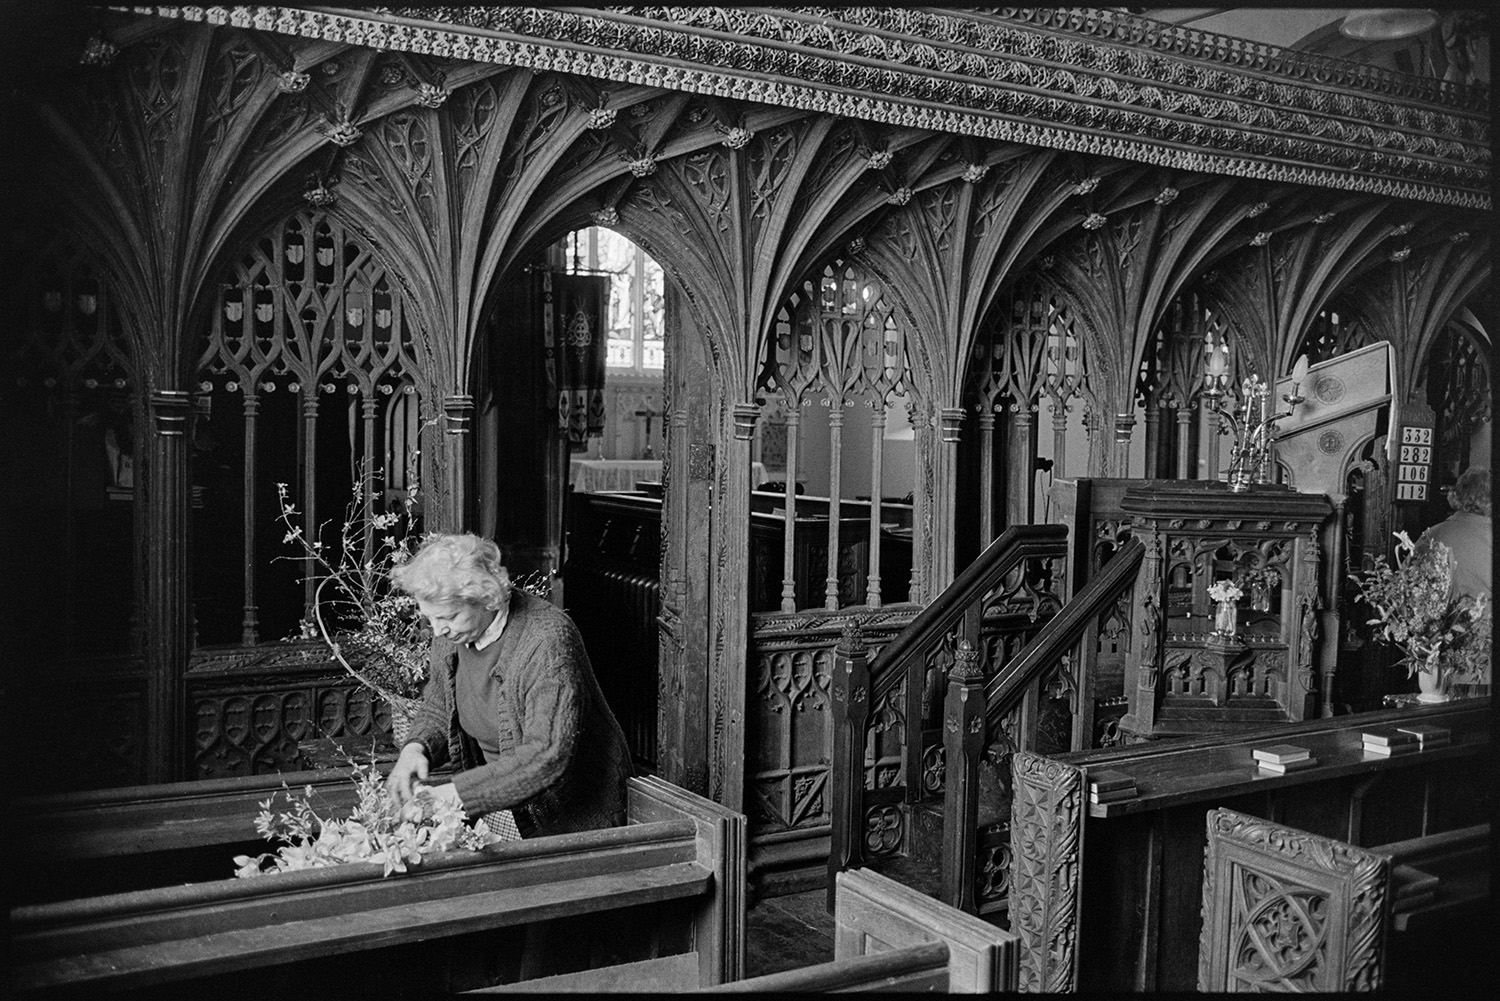 Easter flowers in church. Women chatting and arranging. Fine screen.
[A woman arranging flowers on a pew at Chulmleigh Church for the Easter decoration of the church.  An ornate carved wooden rood screen and steps to the pulpit are visible.]